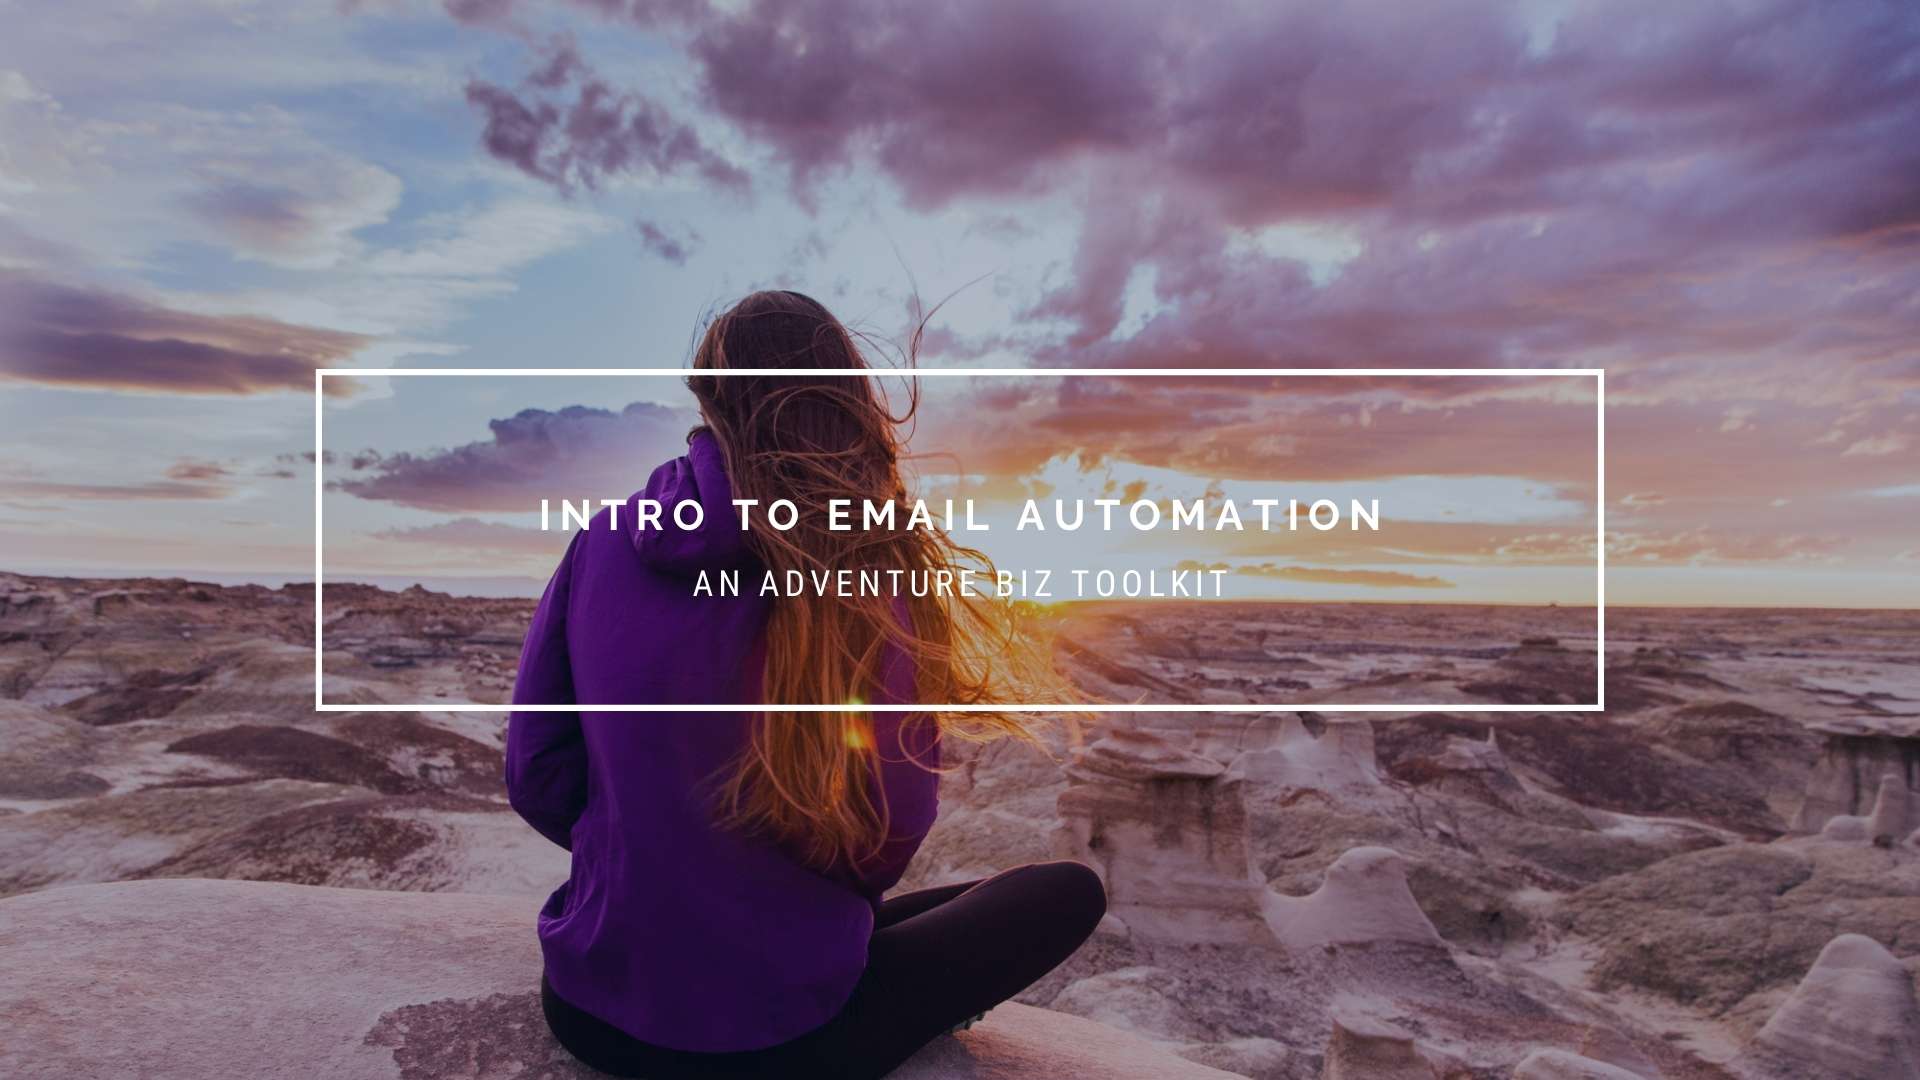 Intro to email automation